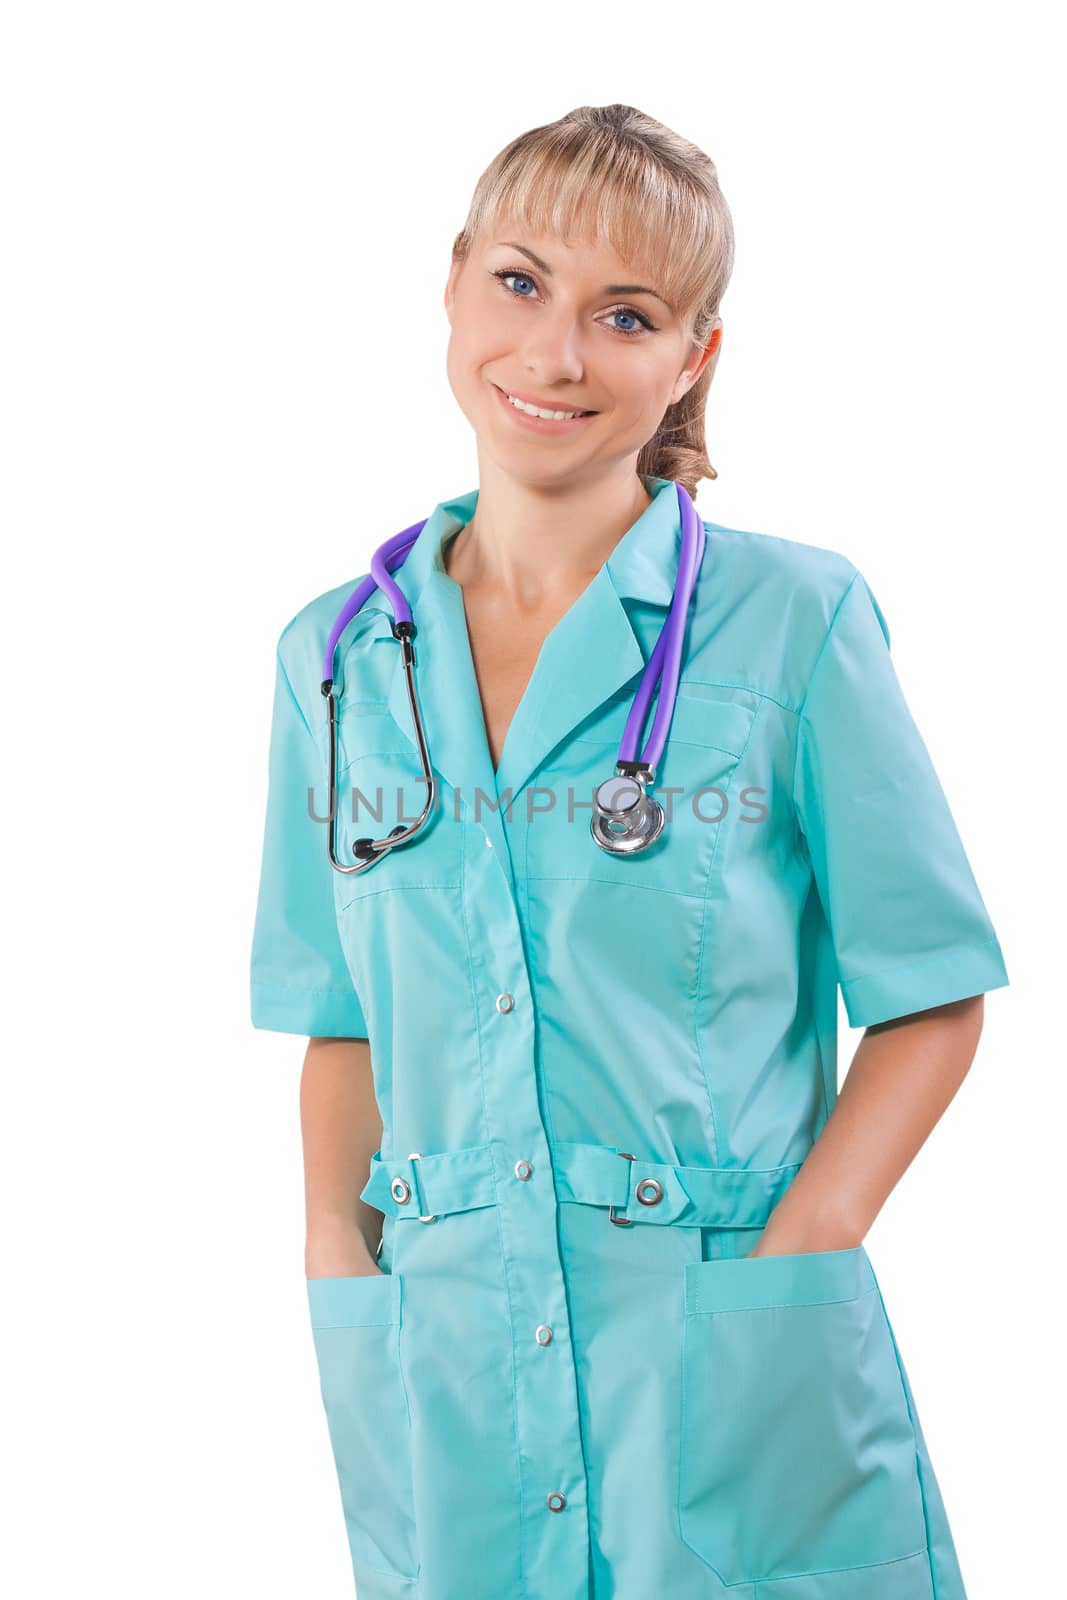 female doctor with hands in pockets smiling isolatyed